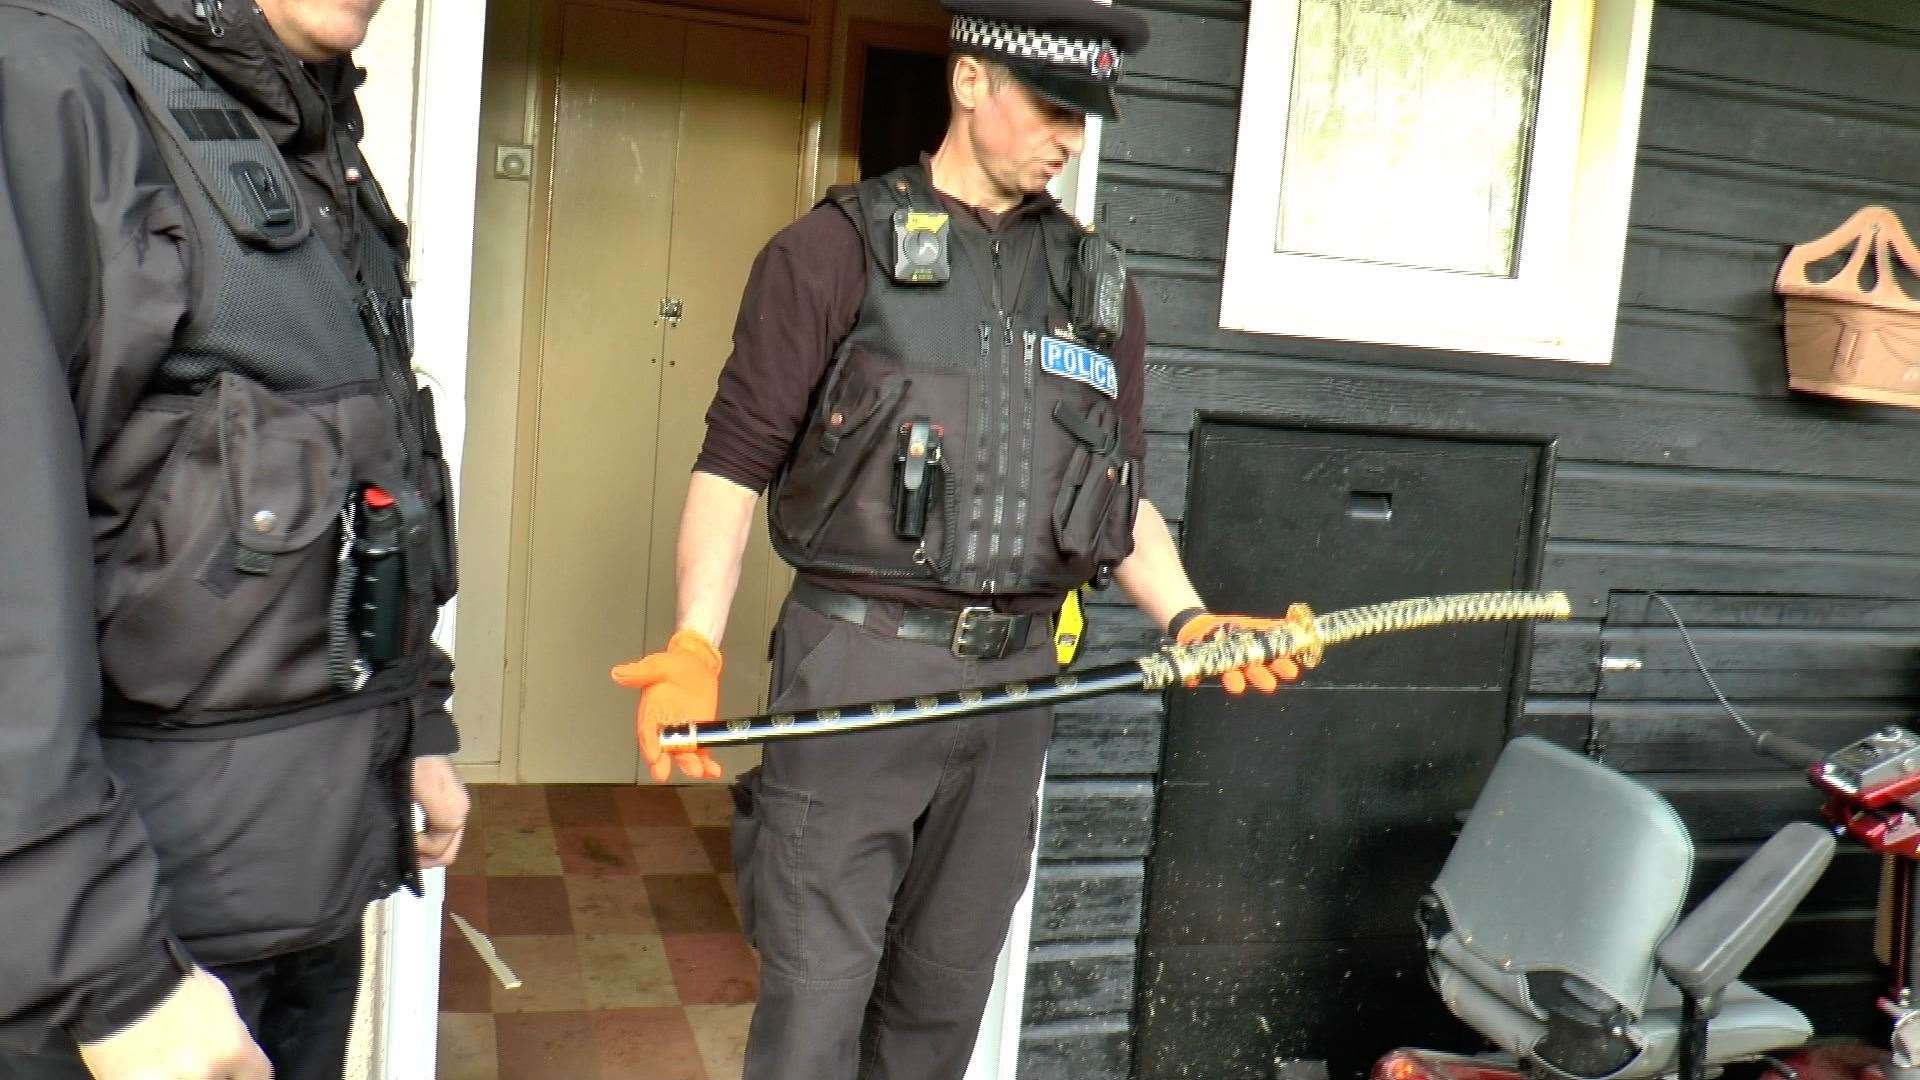 Police raided a house in Maidstone and find a Samurai sword